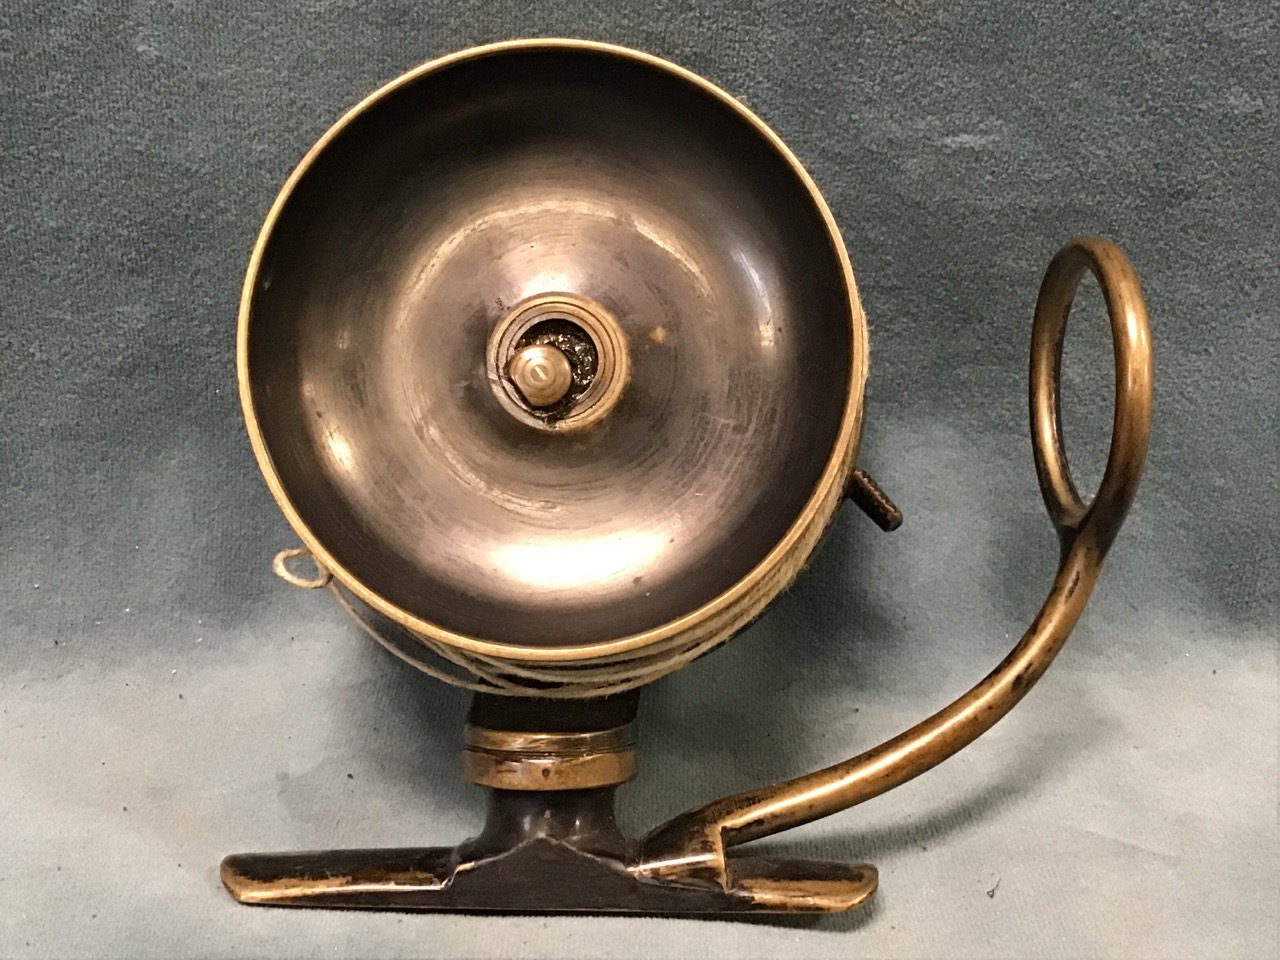 An early Malloch patent brass side casting fishing reel with dished drum and adjustagle line guide - Image 2 of 3